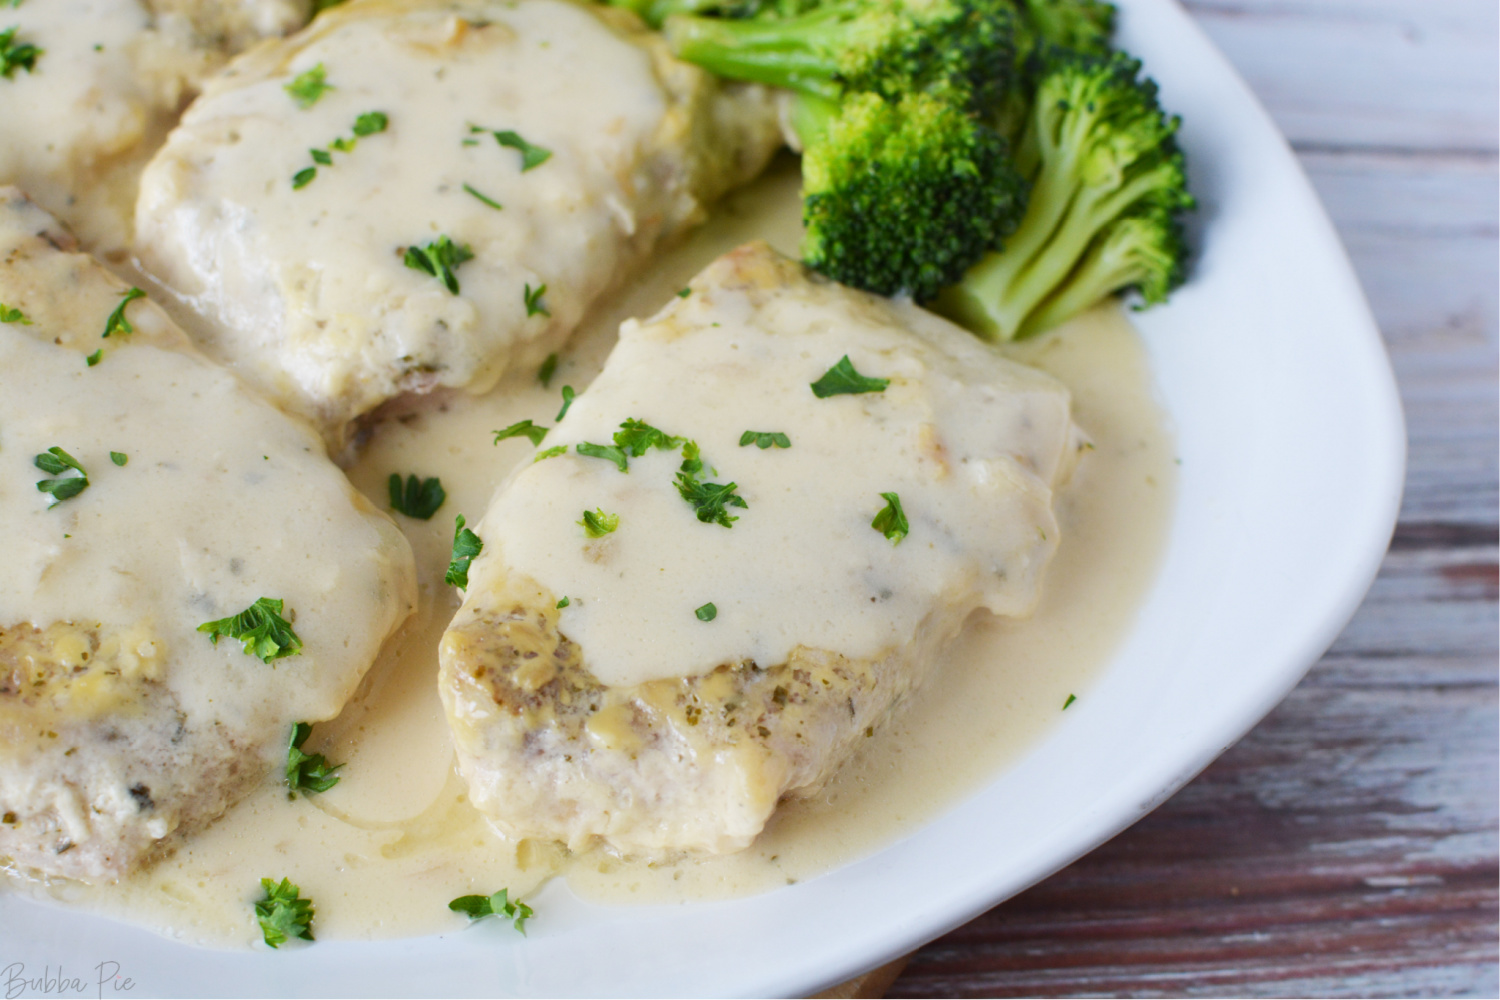 Slow Cooker Ranch Pork Chops being served for dinner with Broccoli